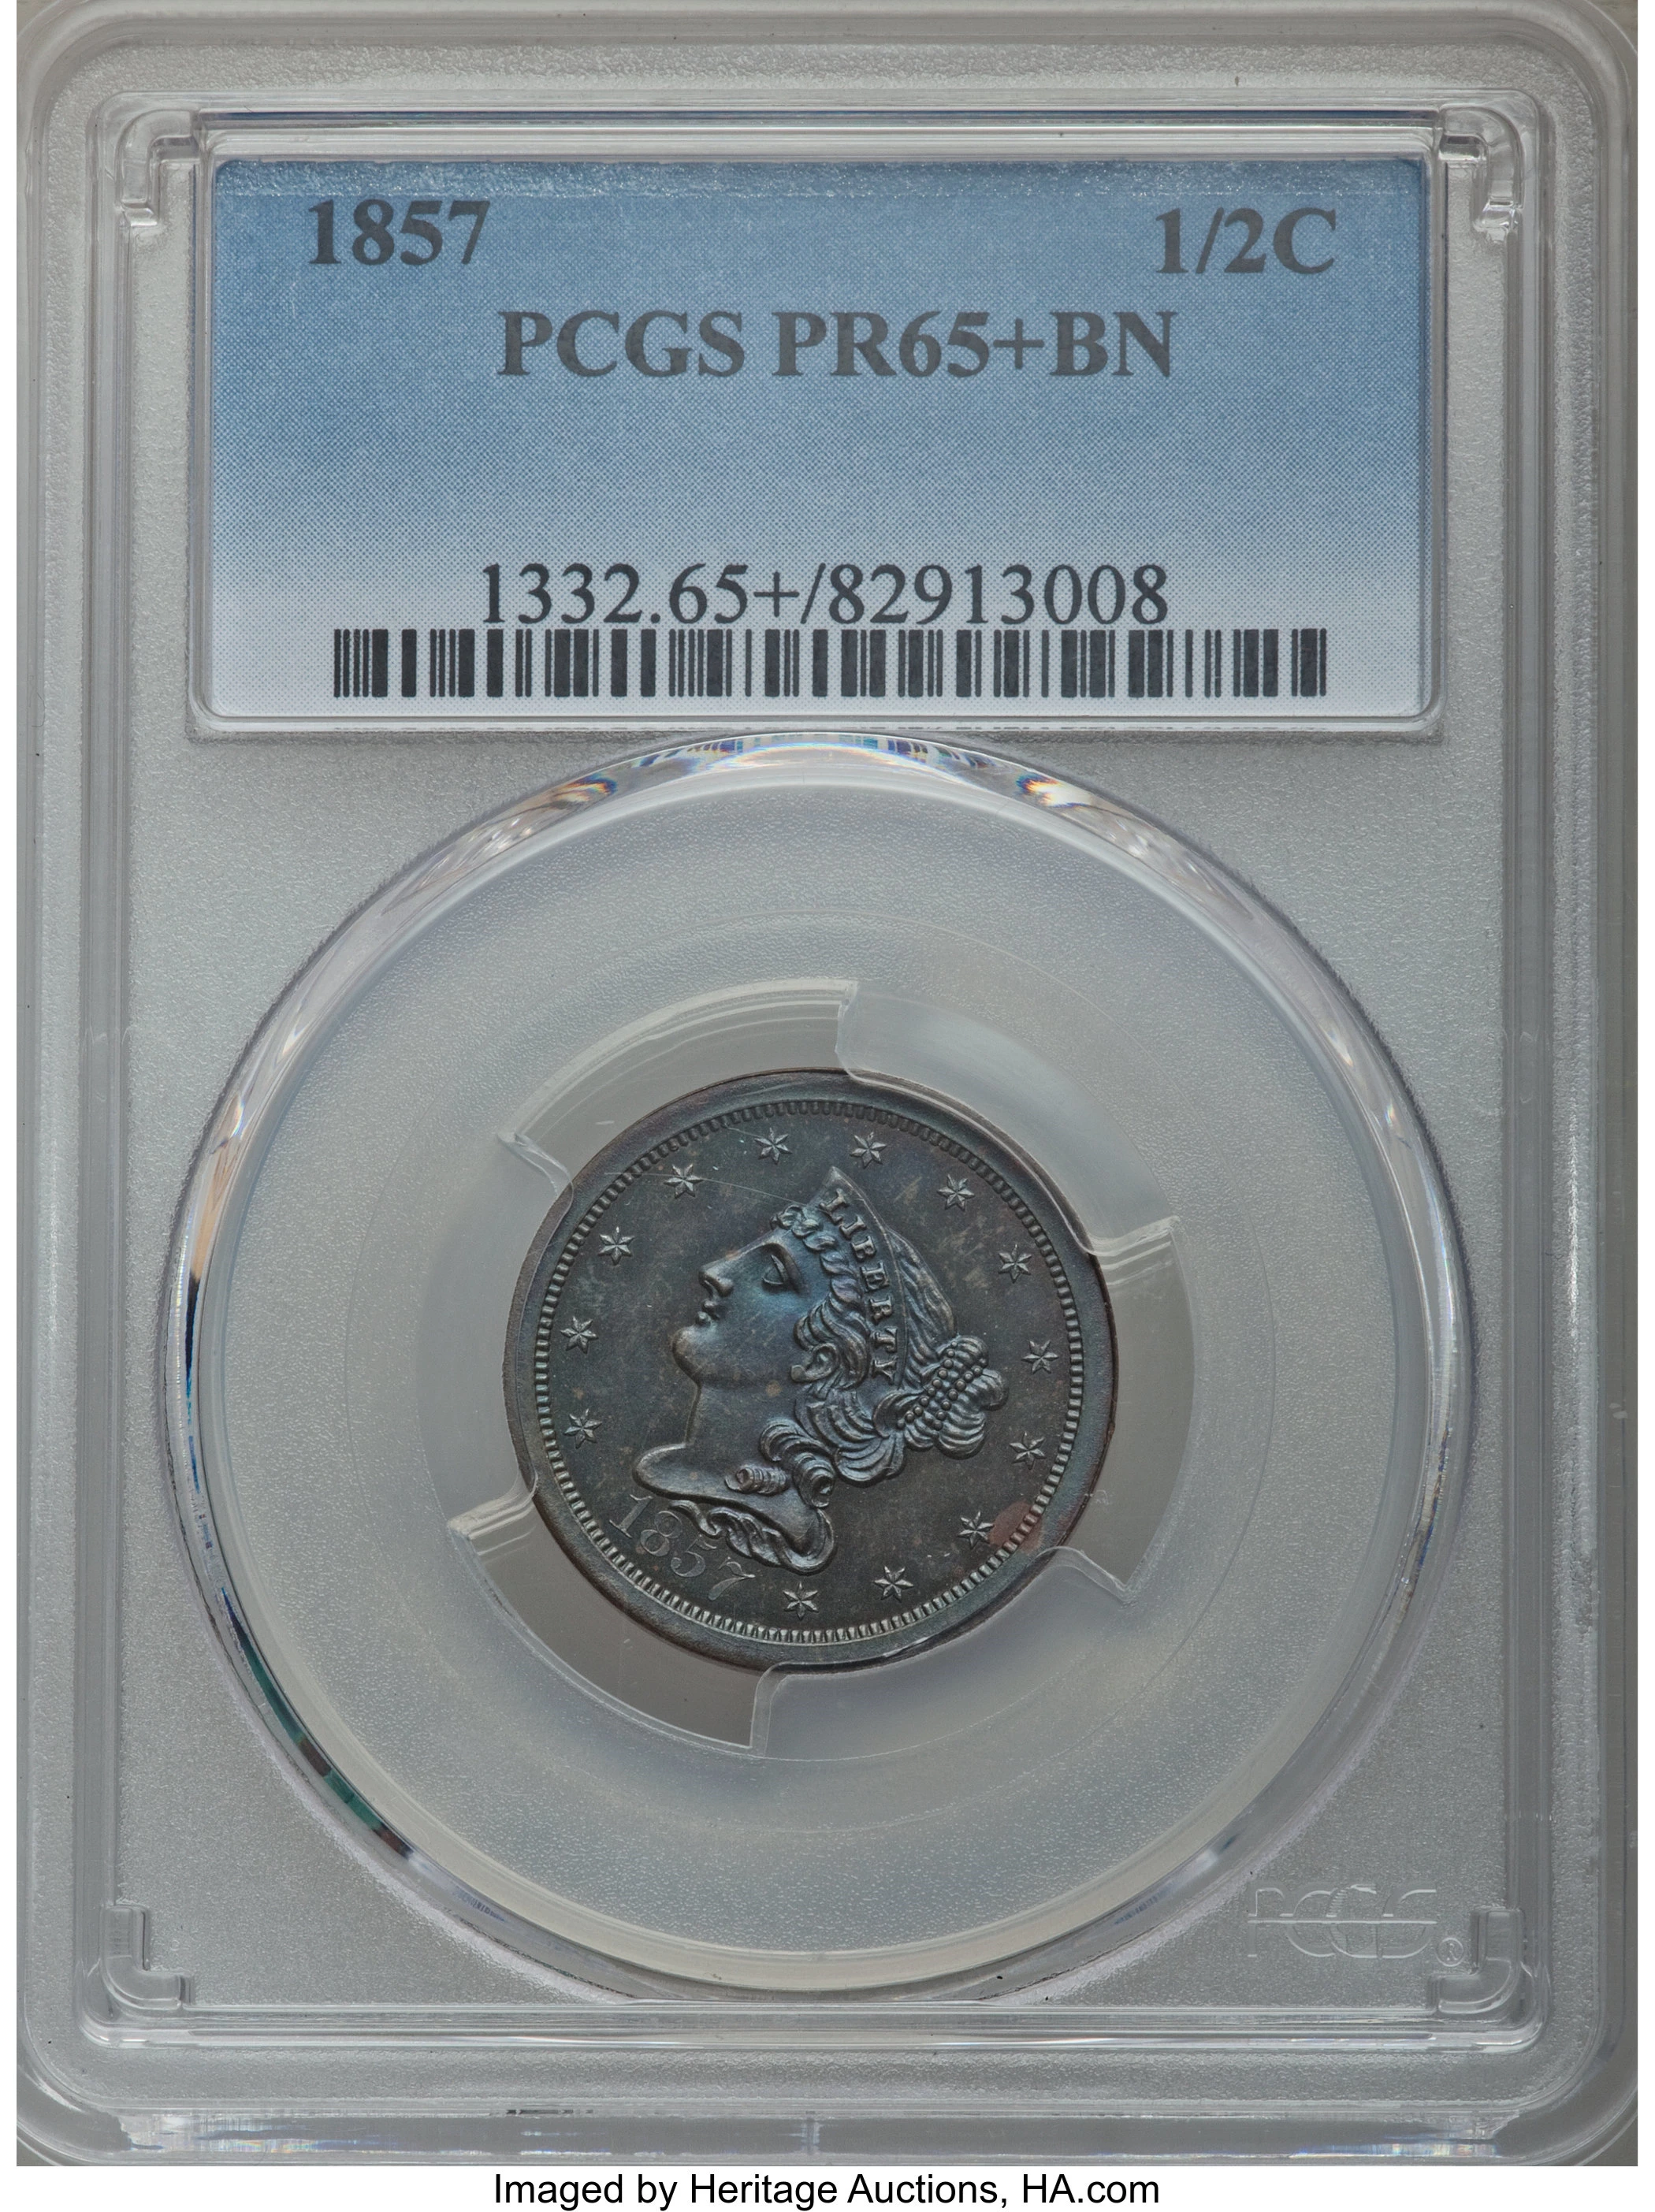 1857 Braided Hair Half Penny Proof BN Coin Pricing Guide